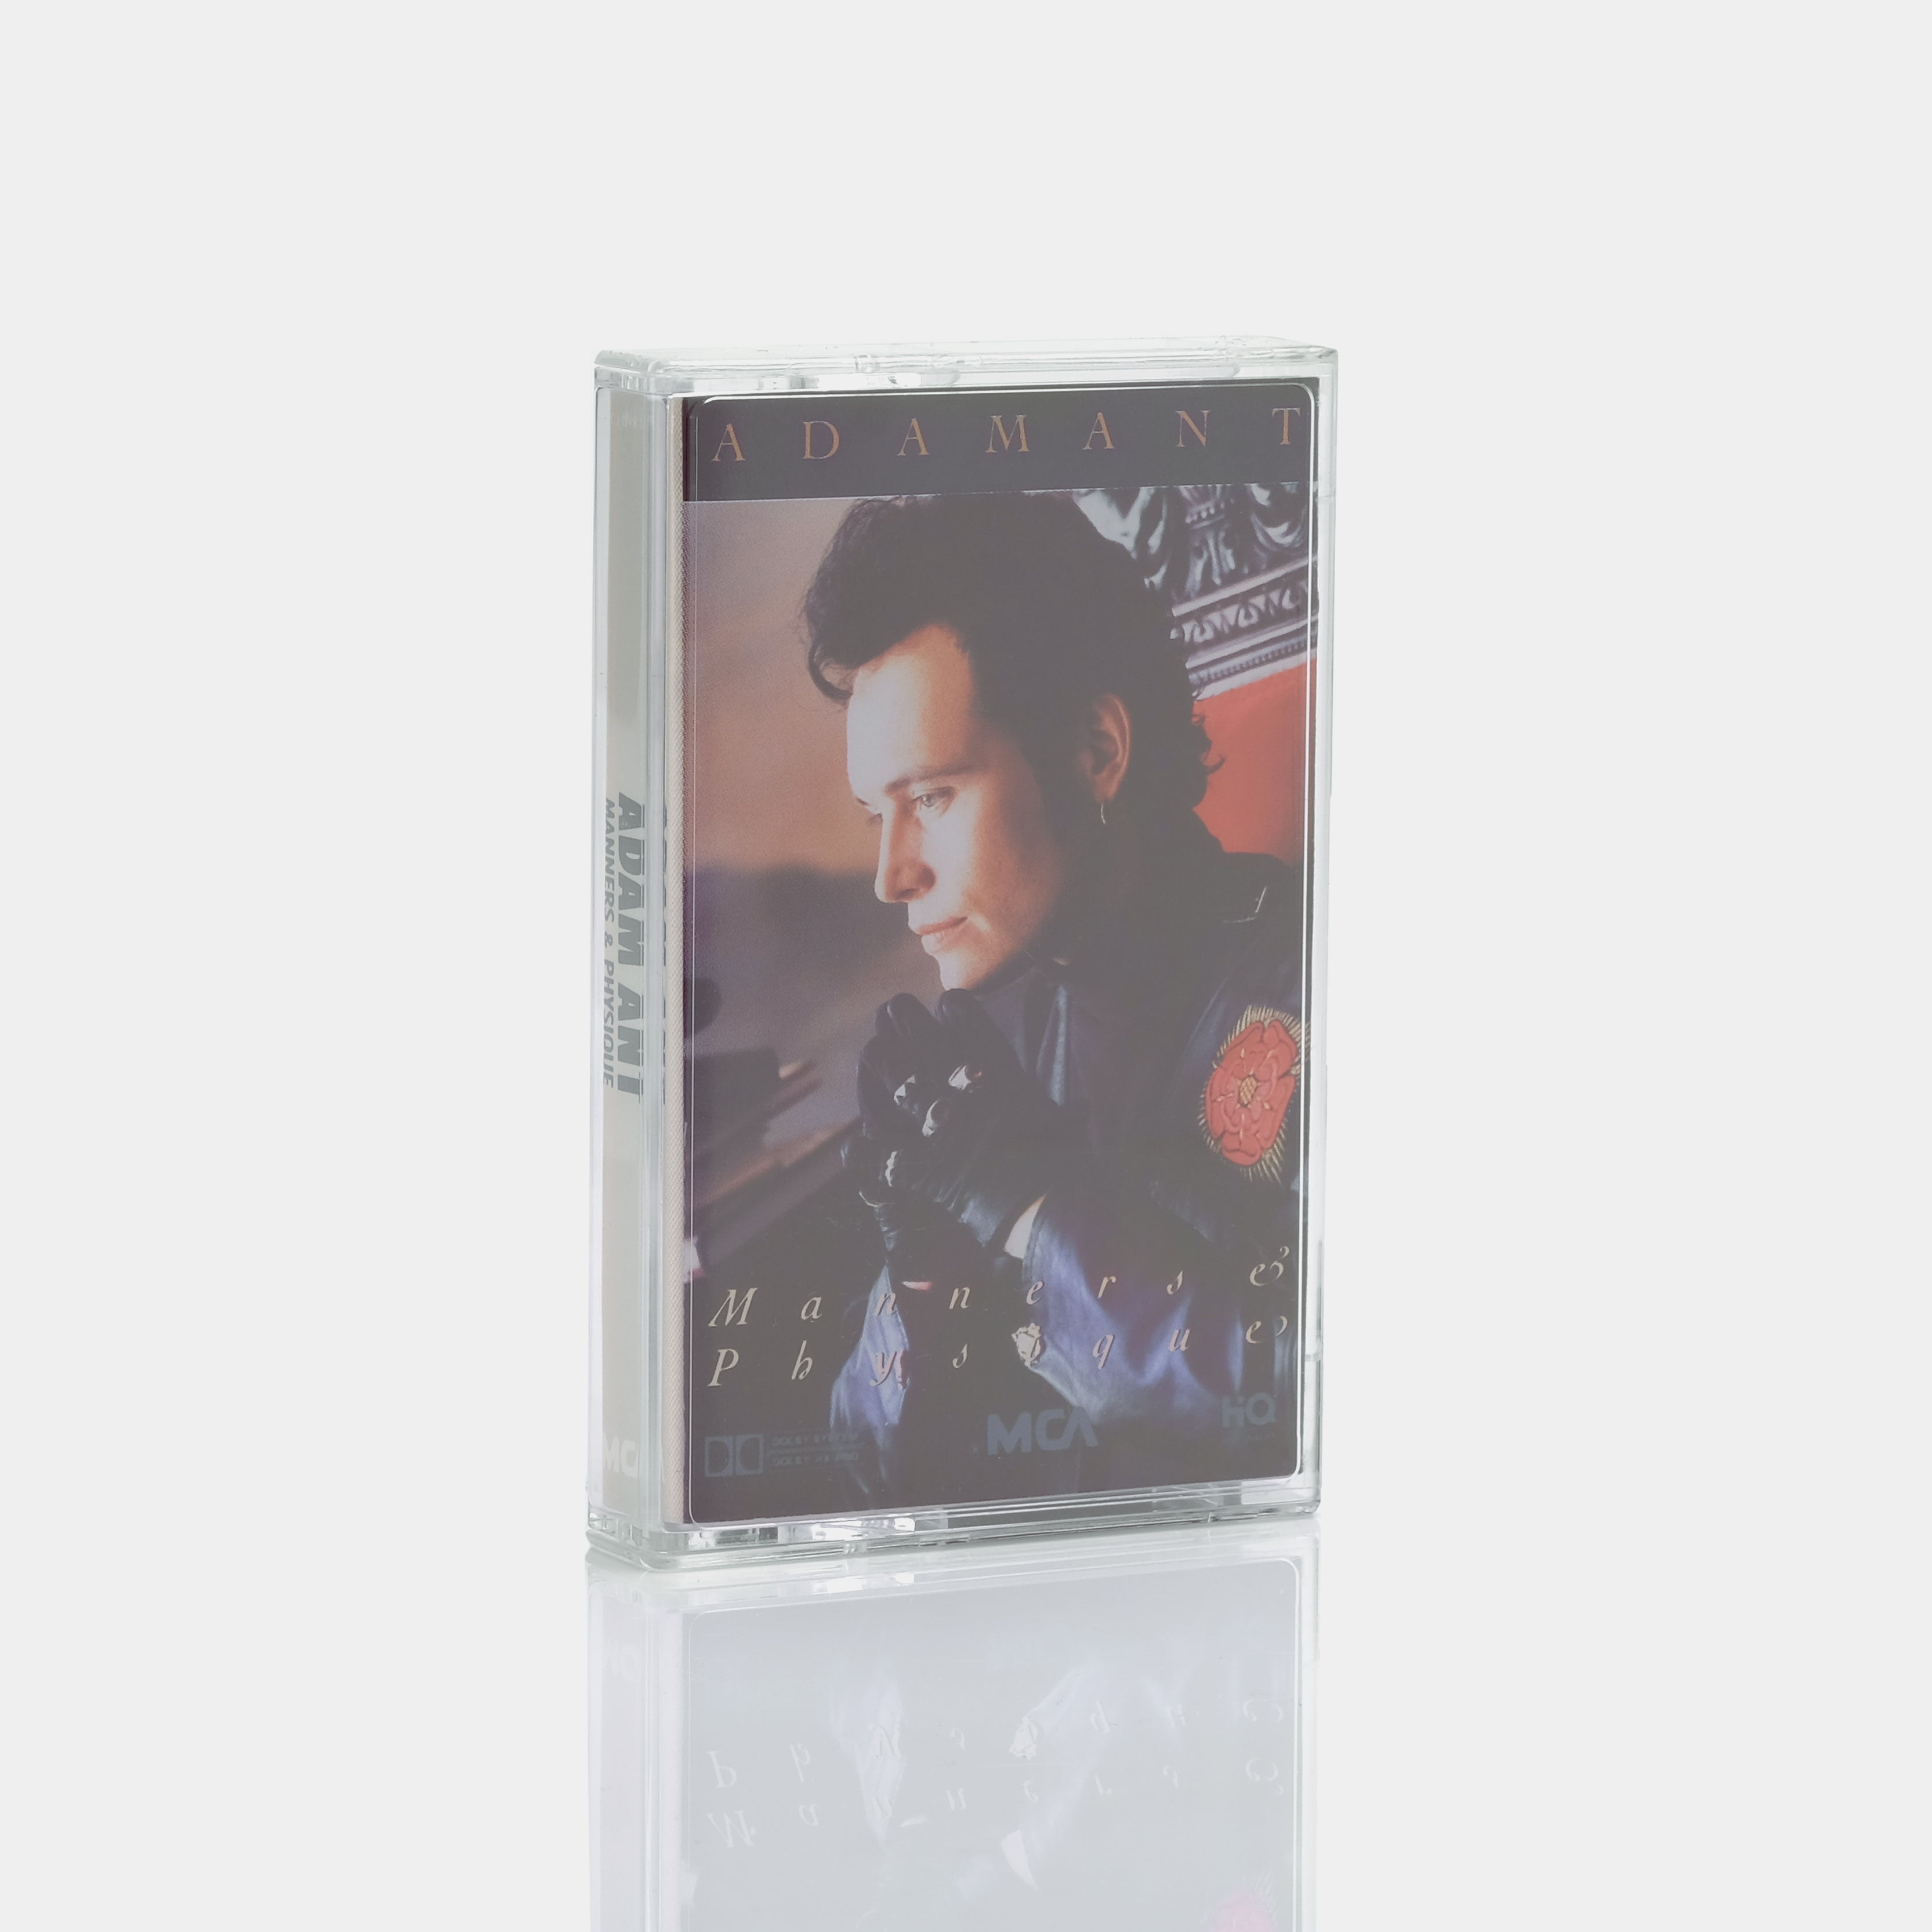 Adam Ant - Manners & Physique Cassette Tape